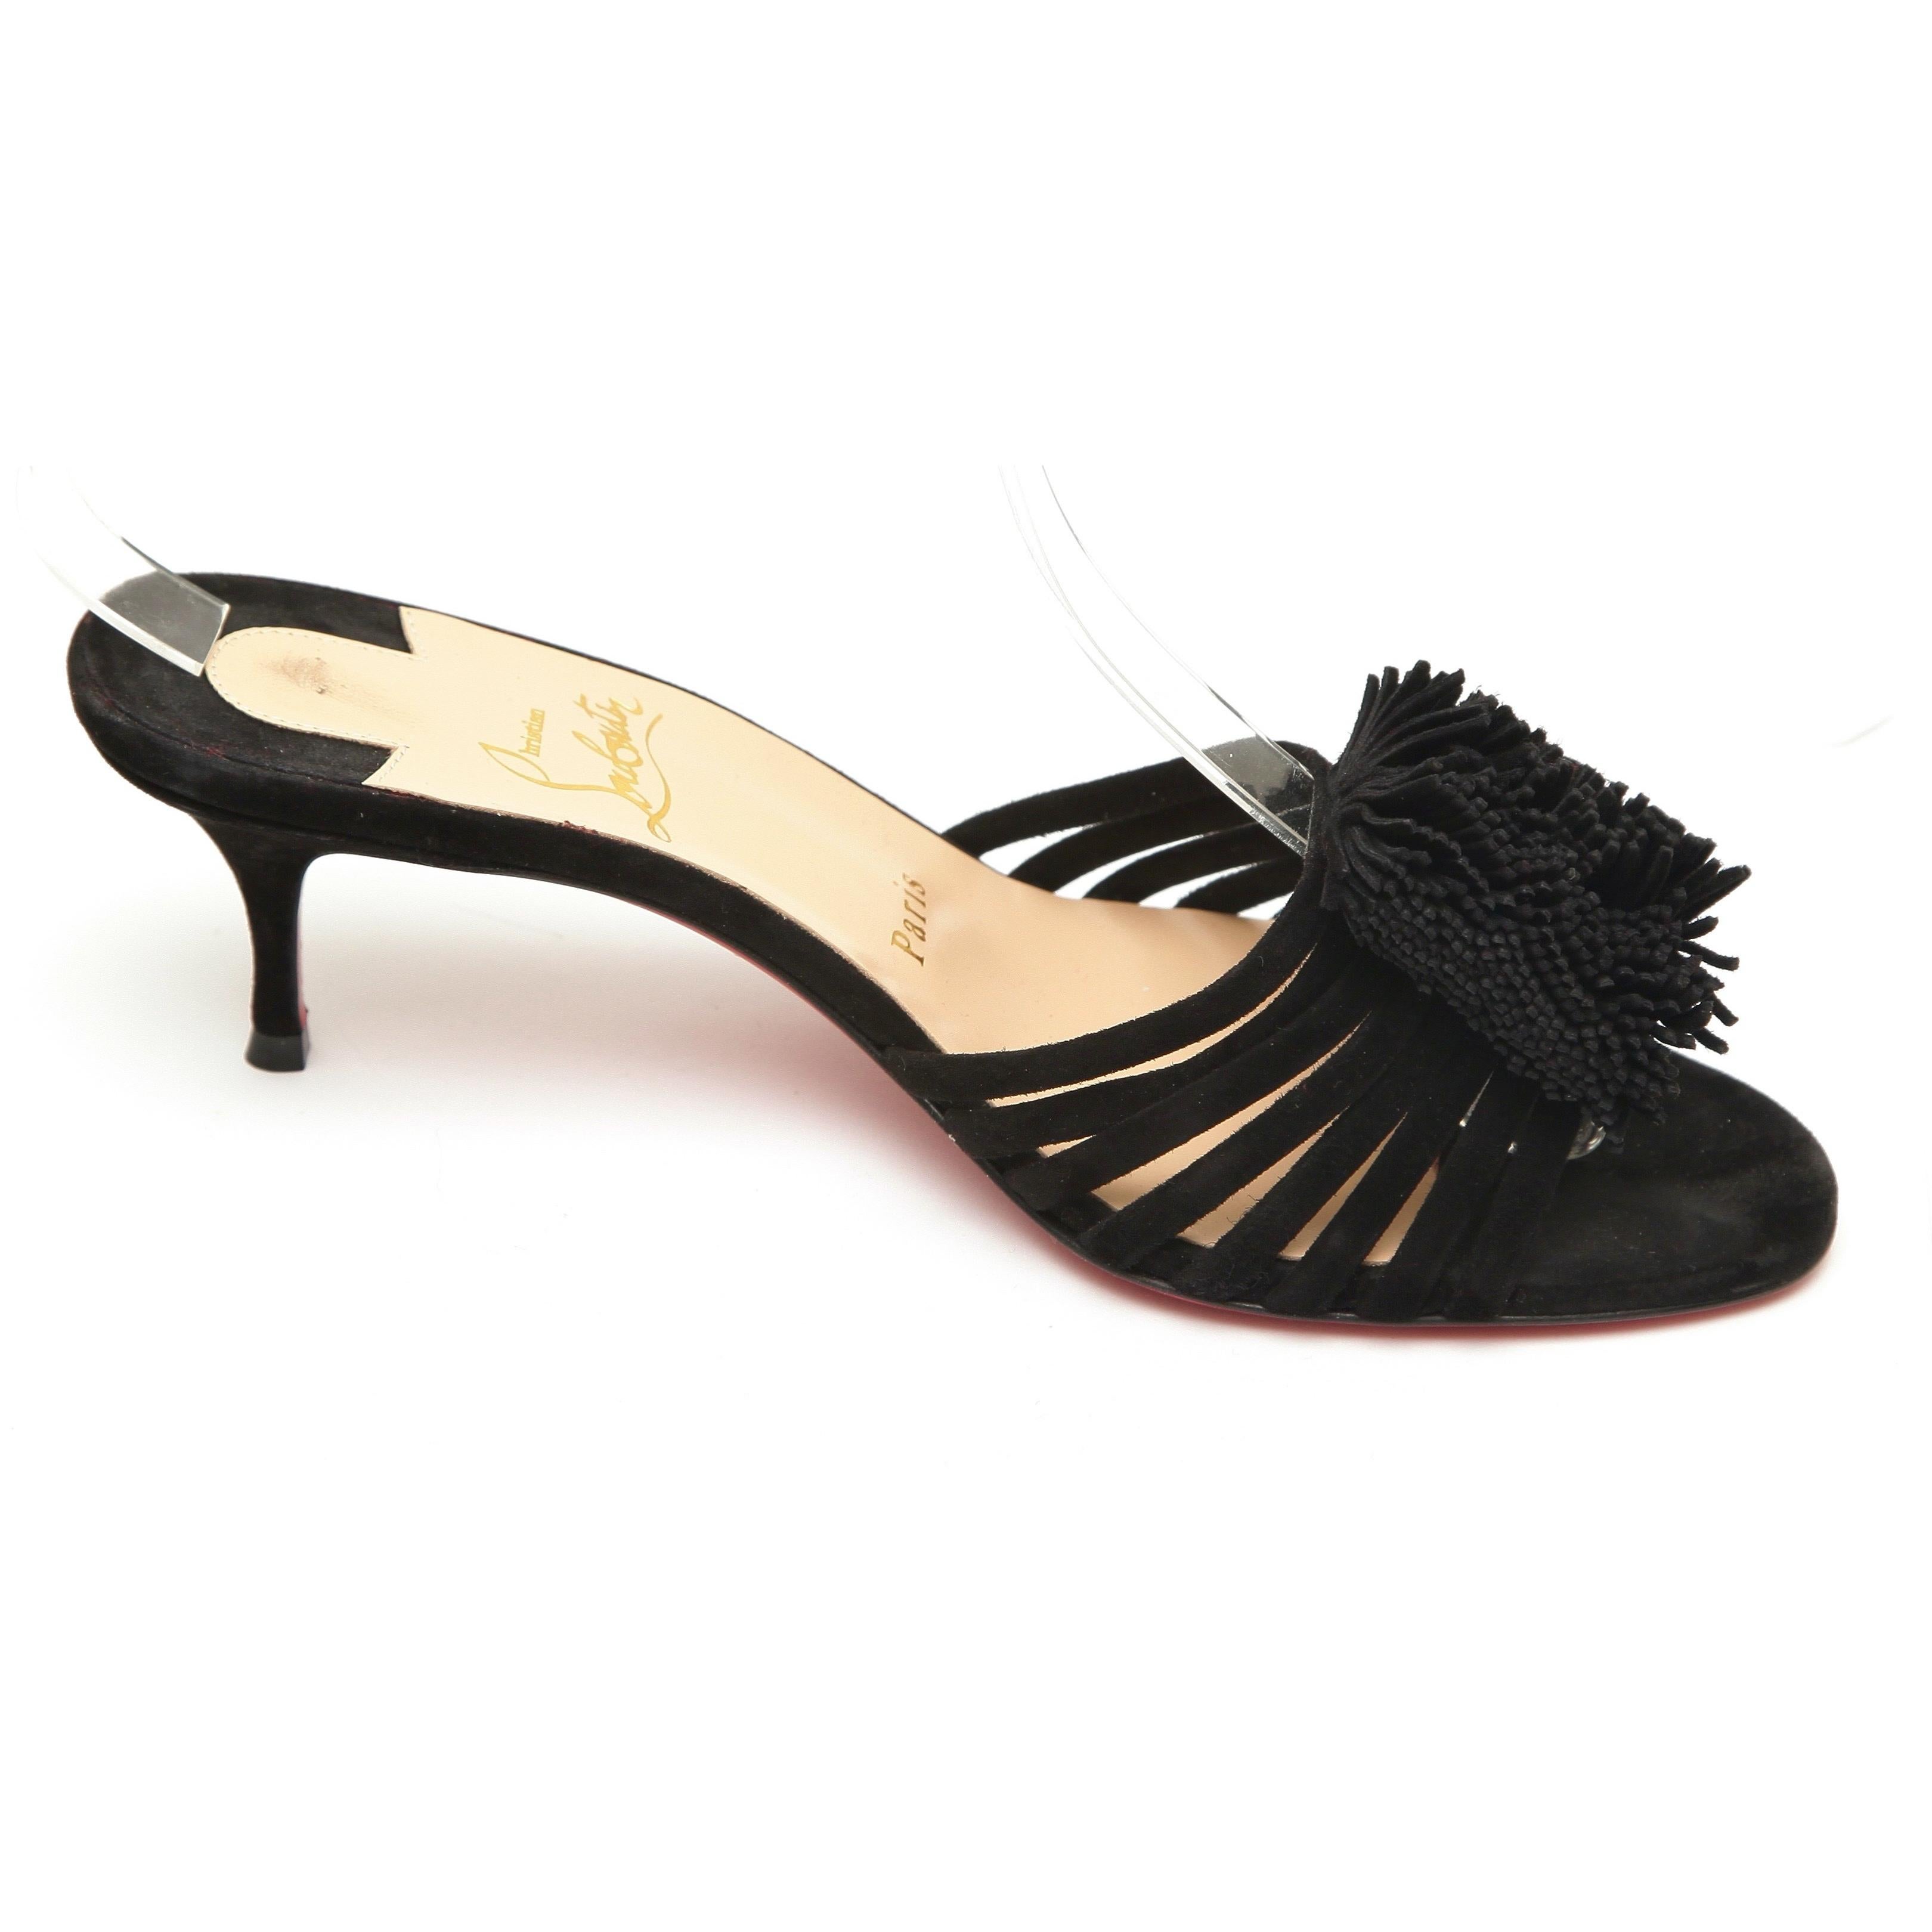 GUARANTEED AUTHENTIC CHRISTIAN LOUBOUTIN BLACK SUEDE BELBROSSA 55 SLIDES

Design:
- Thin straps and fringe in black suede over top of foot.
- Slide on.
- Insole leather lining.
- Peep toe.
- Signature red leather sole.
- Comes with Christian